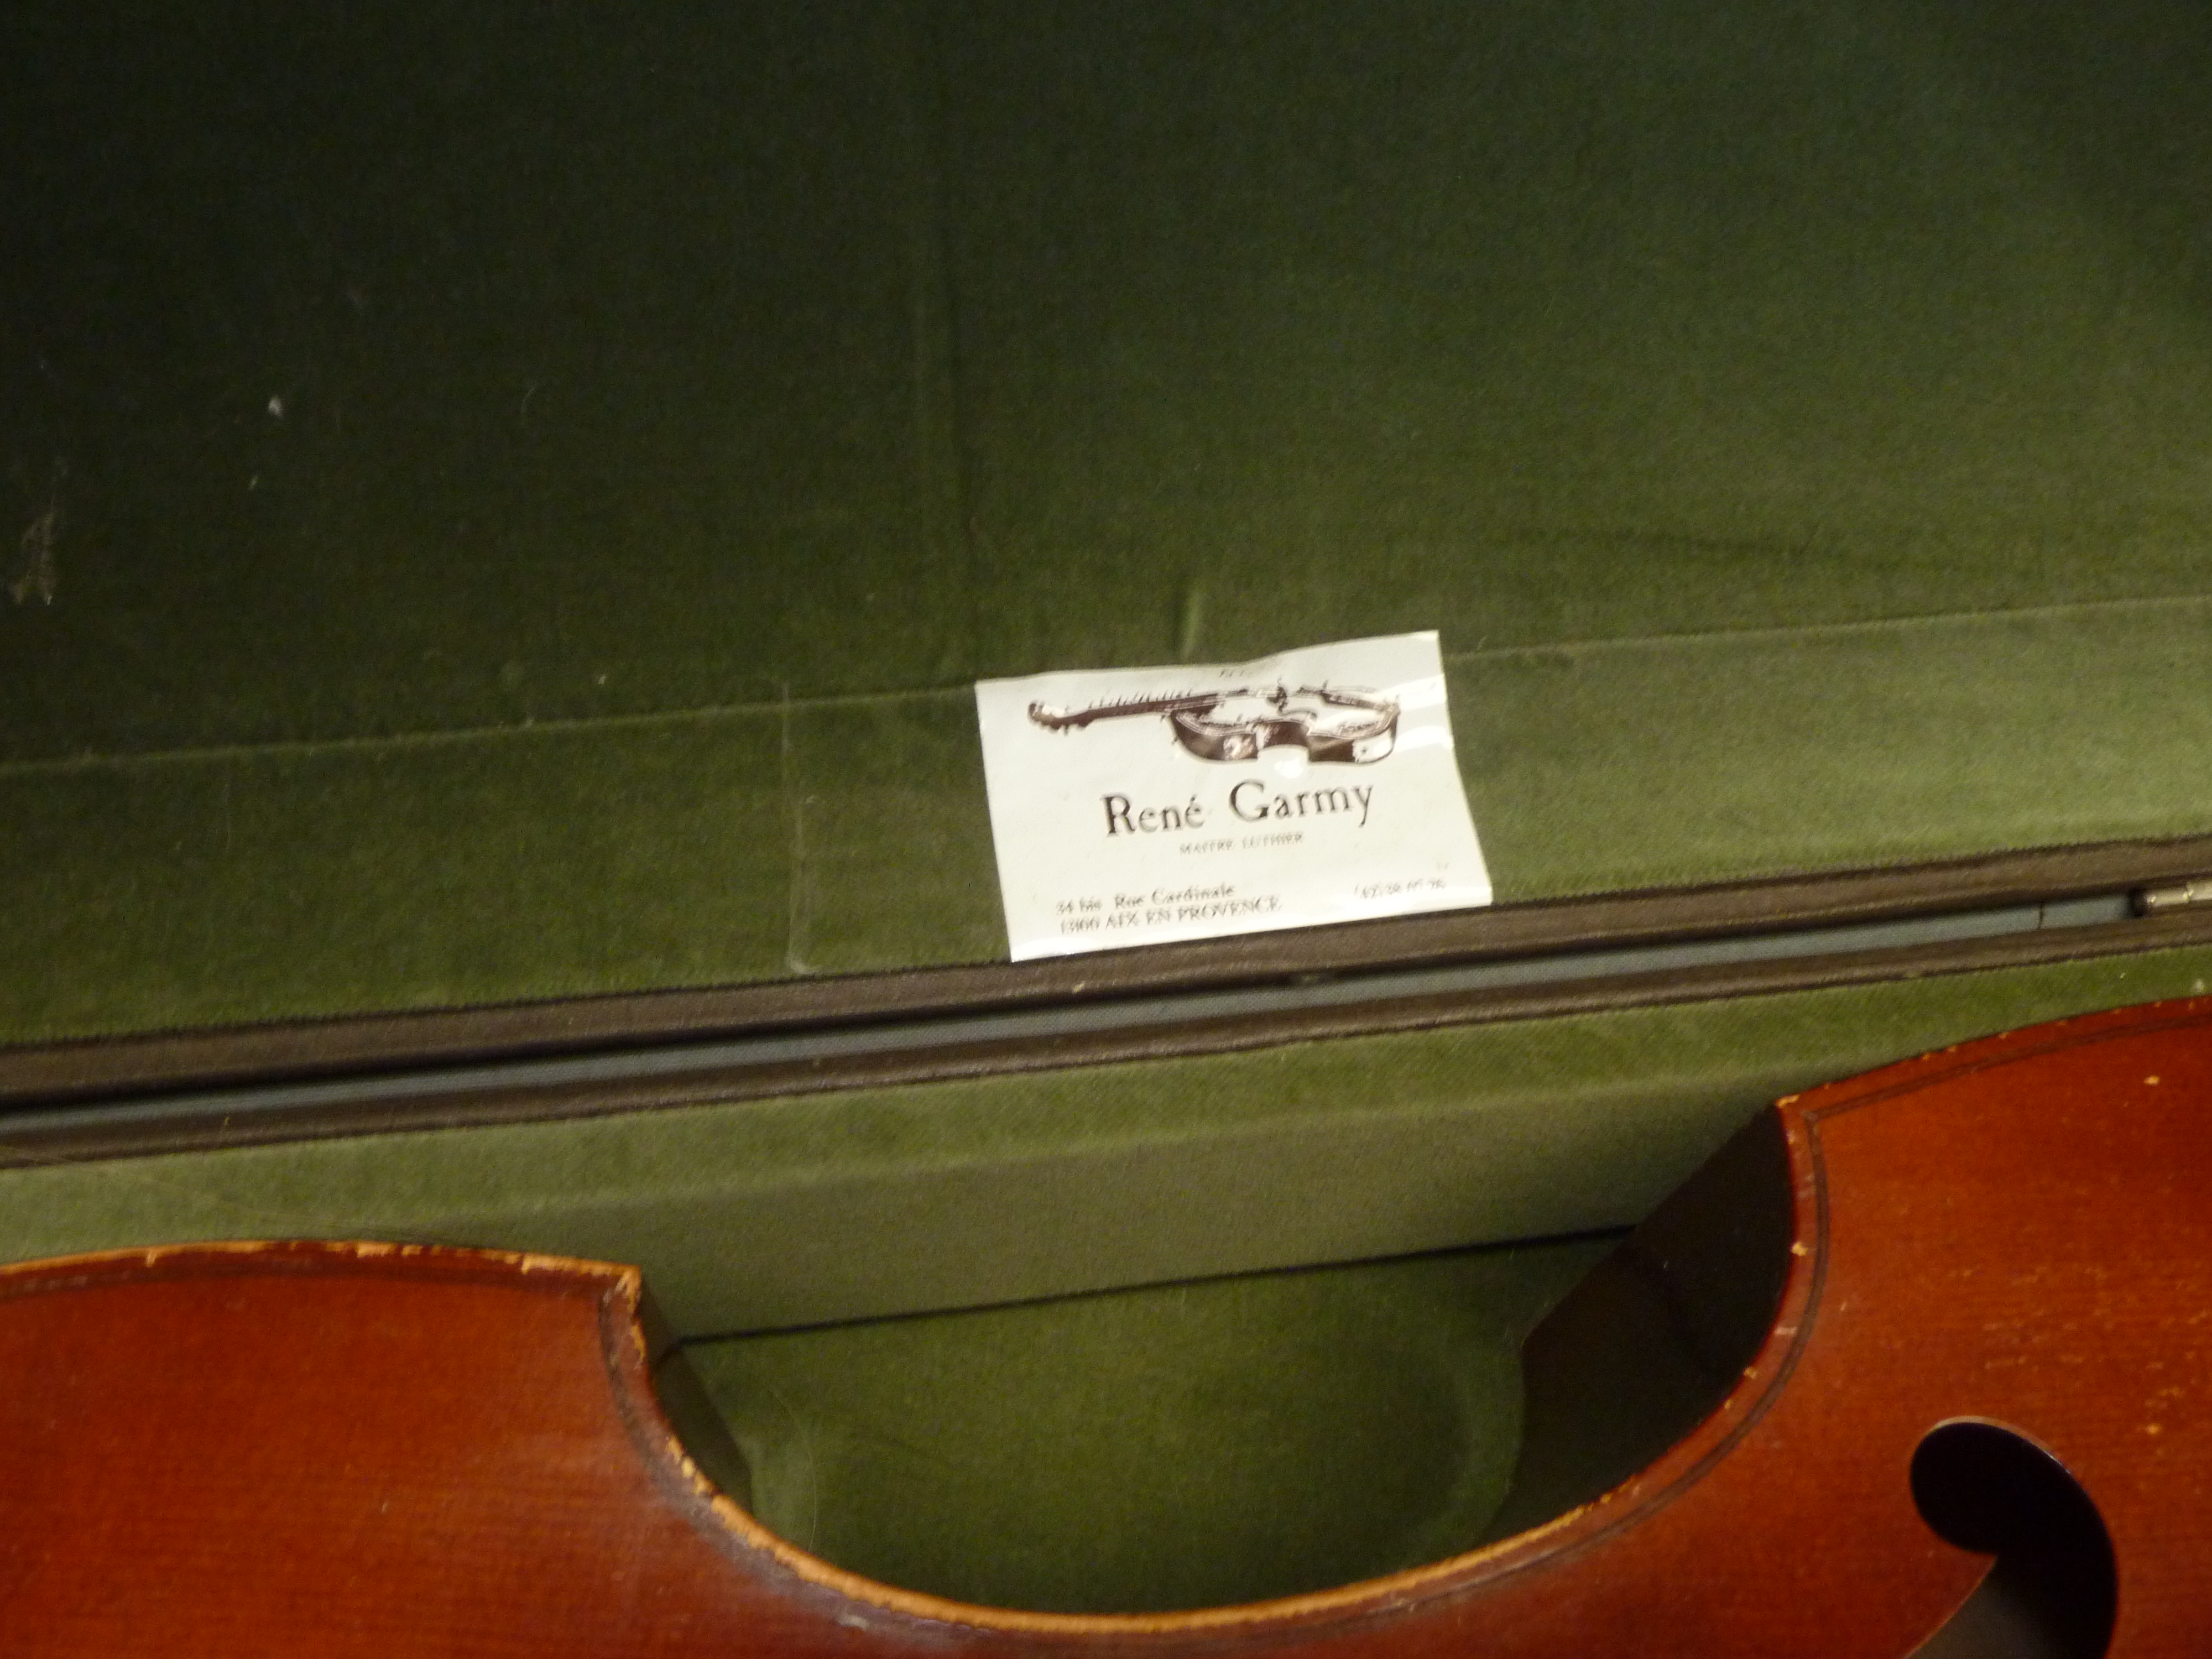 French 7 string bass viola da gamba by Rene Garmy 1983 and bow - Image 5 of 6